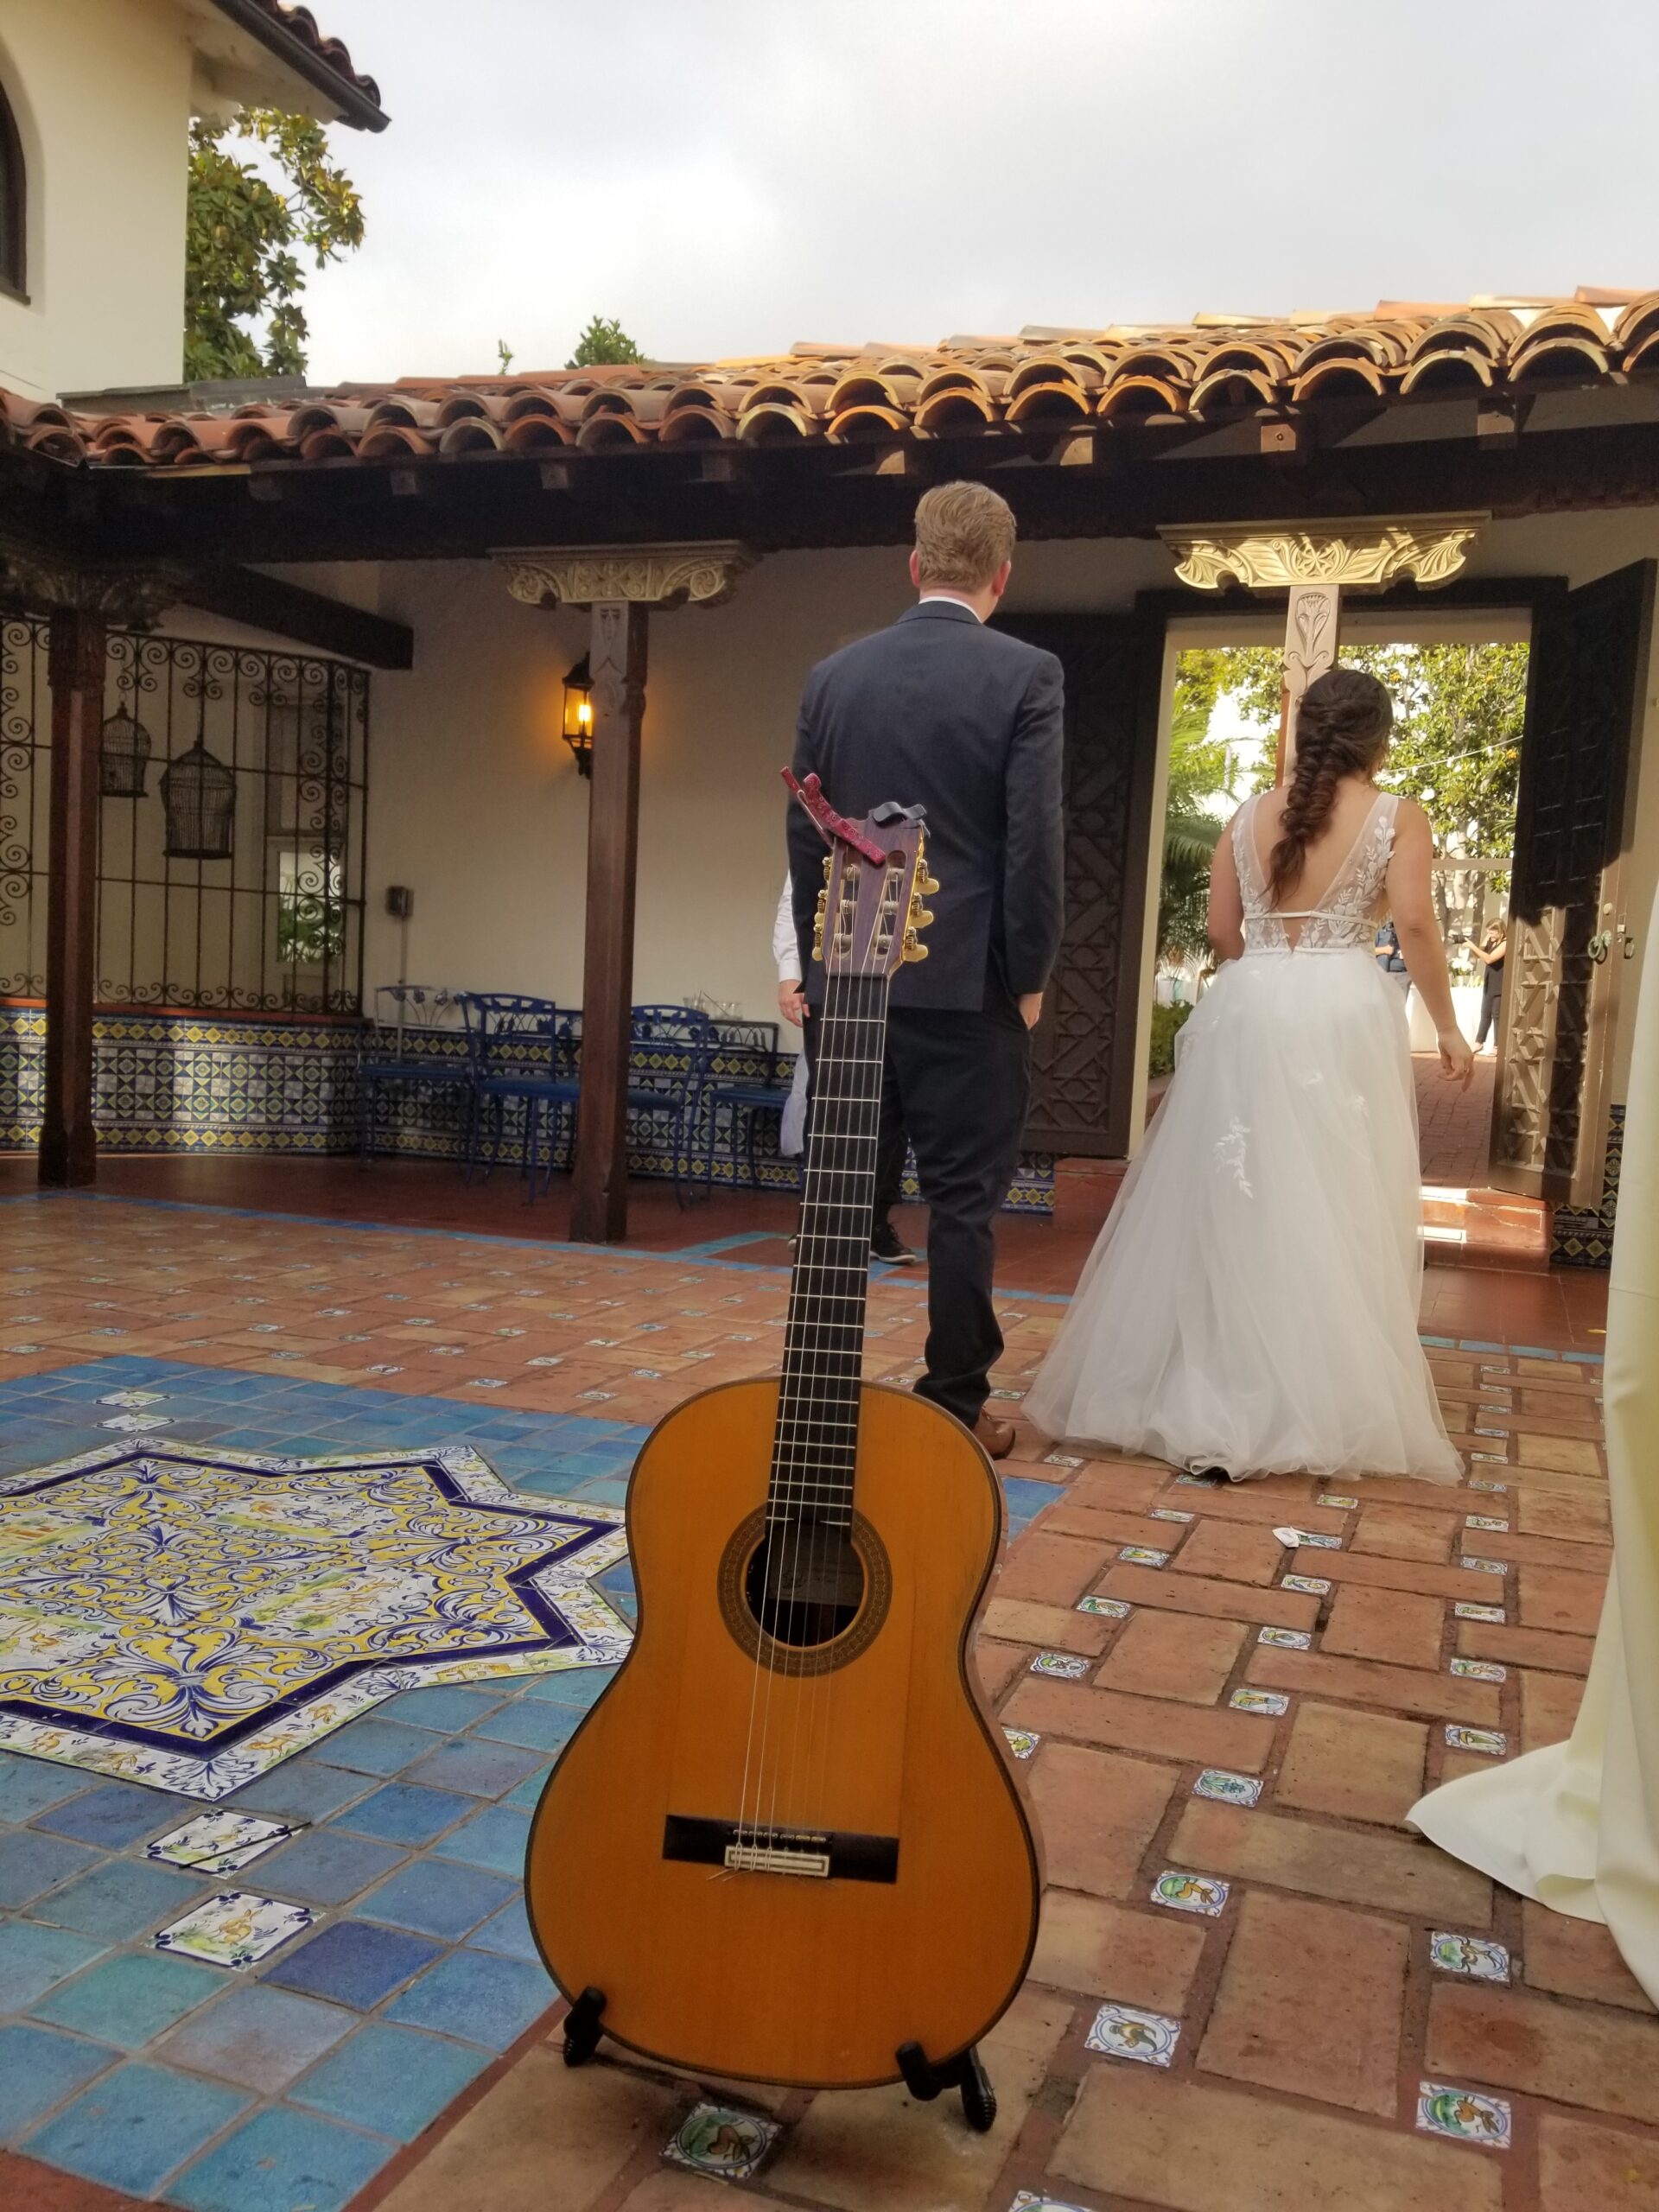 Los Angeles wedding ceremony music, Los Angeles wedding musicians, wedding reception music, Los angeles wedding ceremony music, Southern California wedding musicians, Jazz Trio, Los Angeles, Ventura, Santa Barbara, san diego, orange county. The classical guitar player should also play the spanish styles as well. Ian Kauffman live on a wedding in Palm Springs. Acoustic guitar player for weddings, acoustic guitar player for hire. I am the wedding musician and guitar player for san diego. I have played tons of weddings in los angeles and would love to play for you and your wedding ceremony either in los angeles or las vegas! Call me for your live wedding music and entertainment needs in santa barbara or ventura. I have the best live music as a professional guitarist anywhere in California.I play ceremony wedding music and am a for hire spanish wedding guitarist in Temecula and San diego spanish and orange county. I am the best acoustic solo guitarist in san diego playing popular wedding songs on acoustic guitar latin musician for hire, professional services of live music now playing live acoustic guitarist for weddings, Ian Kauffman live on a wedding in Palm Springs. Acoustic guitar player for weddings, acoustic guitar player for hire, wedding musicians san diego, los angeles wedding music, ceremony wedding music, hire a guitarist, spanish guitarist san diego, wedding songs spanish, wedding songs acoustic, spanish classical guitarist, spanish songs for weddings, san diego guitarist, spanish guitar player, weddings songs with guitar, los angeles guitarist, wedding entertainment near me, live music wedding ceremony, wedding musicians, musicians for a wedding, ceremony musician, wedding ceremony guitarist, musicians for a wedding ceremony, acoustic guitarist near me, spanish guitar musician, spanish guitarist los angeles, spanish guitar orange county, spanish guitar southern california, latin guitarist, bossa nova guitarist, modern acoustic wedding songs, classical guitar wedding music, wedding guitarist near me. classical guitar wedding ceremony orange county wedding guitarist